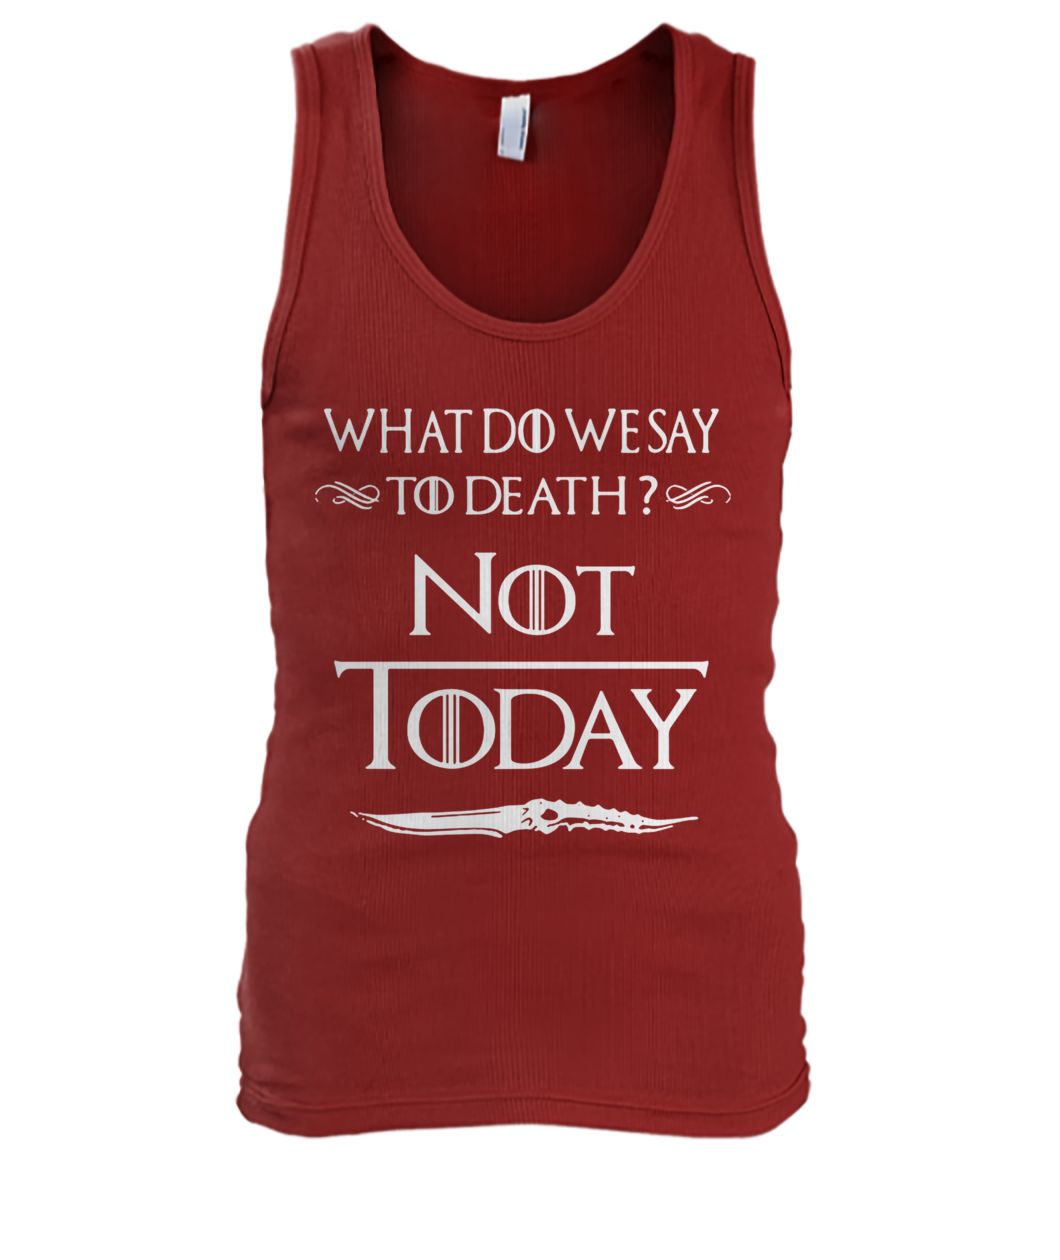 Game of thrones what do we say to death not today men's tank top